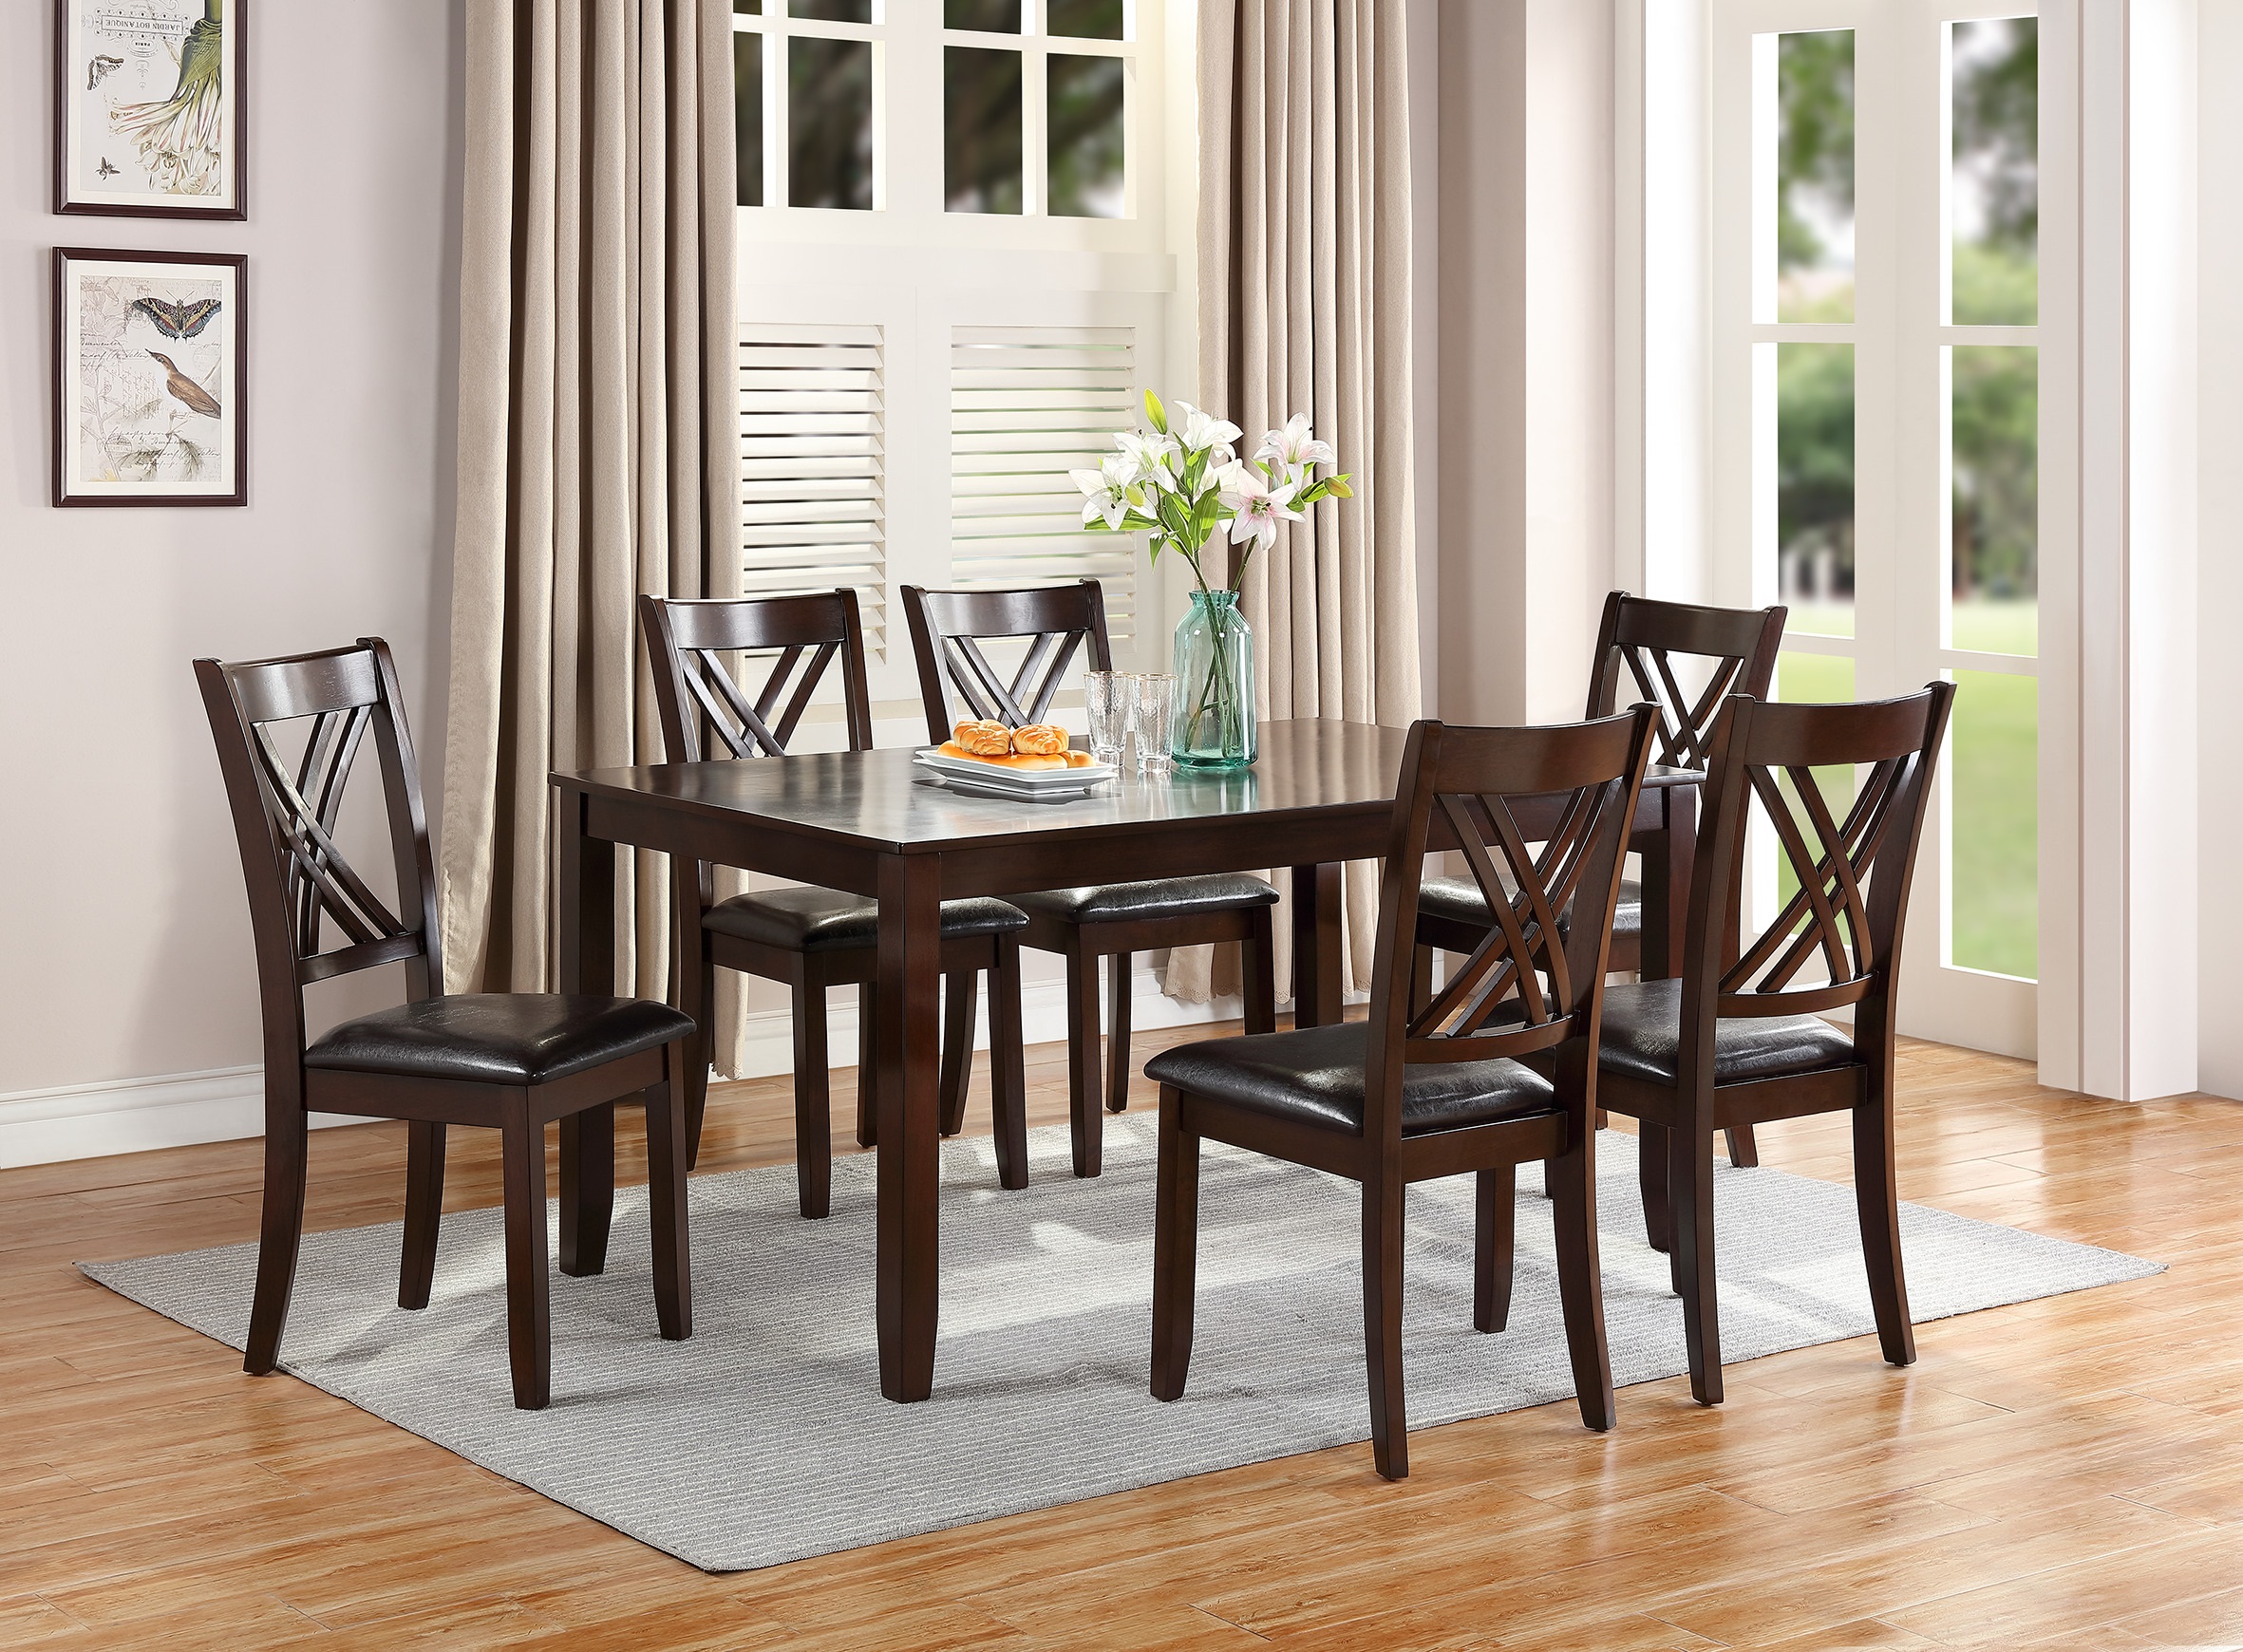 7pcs Dining Set Dining Table 6 Side Chairs Clean Espresso Finish Cushion Seats X Design back Chairs-Boyel Living